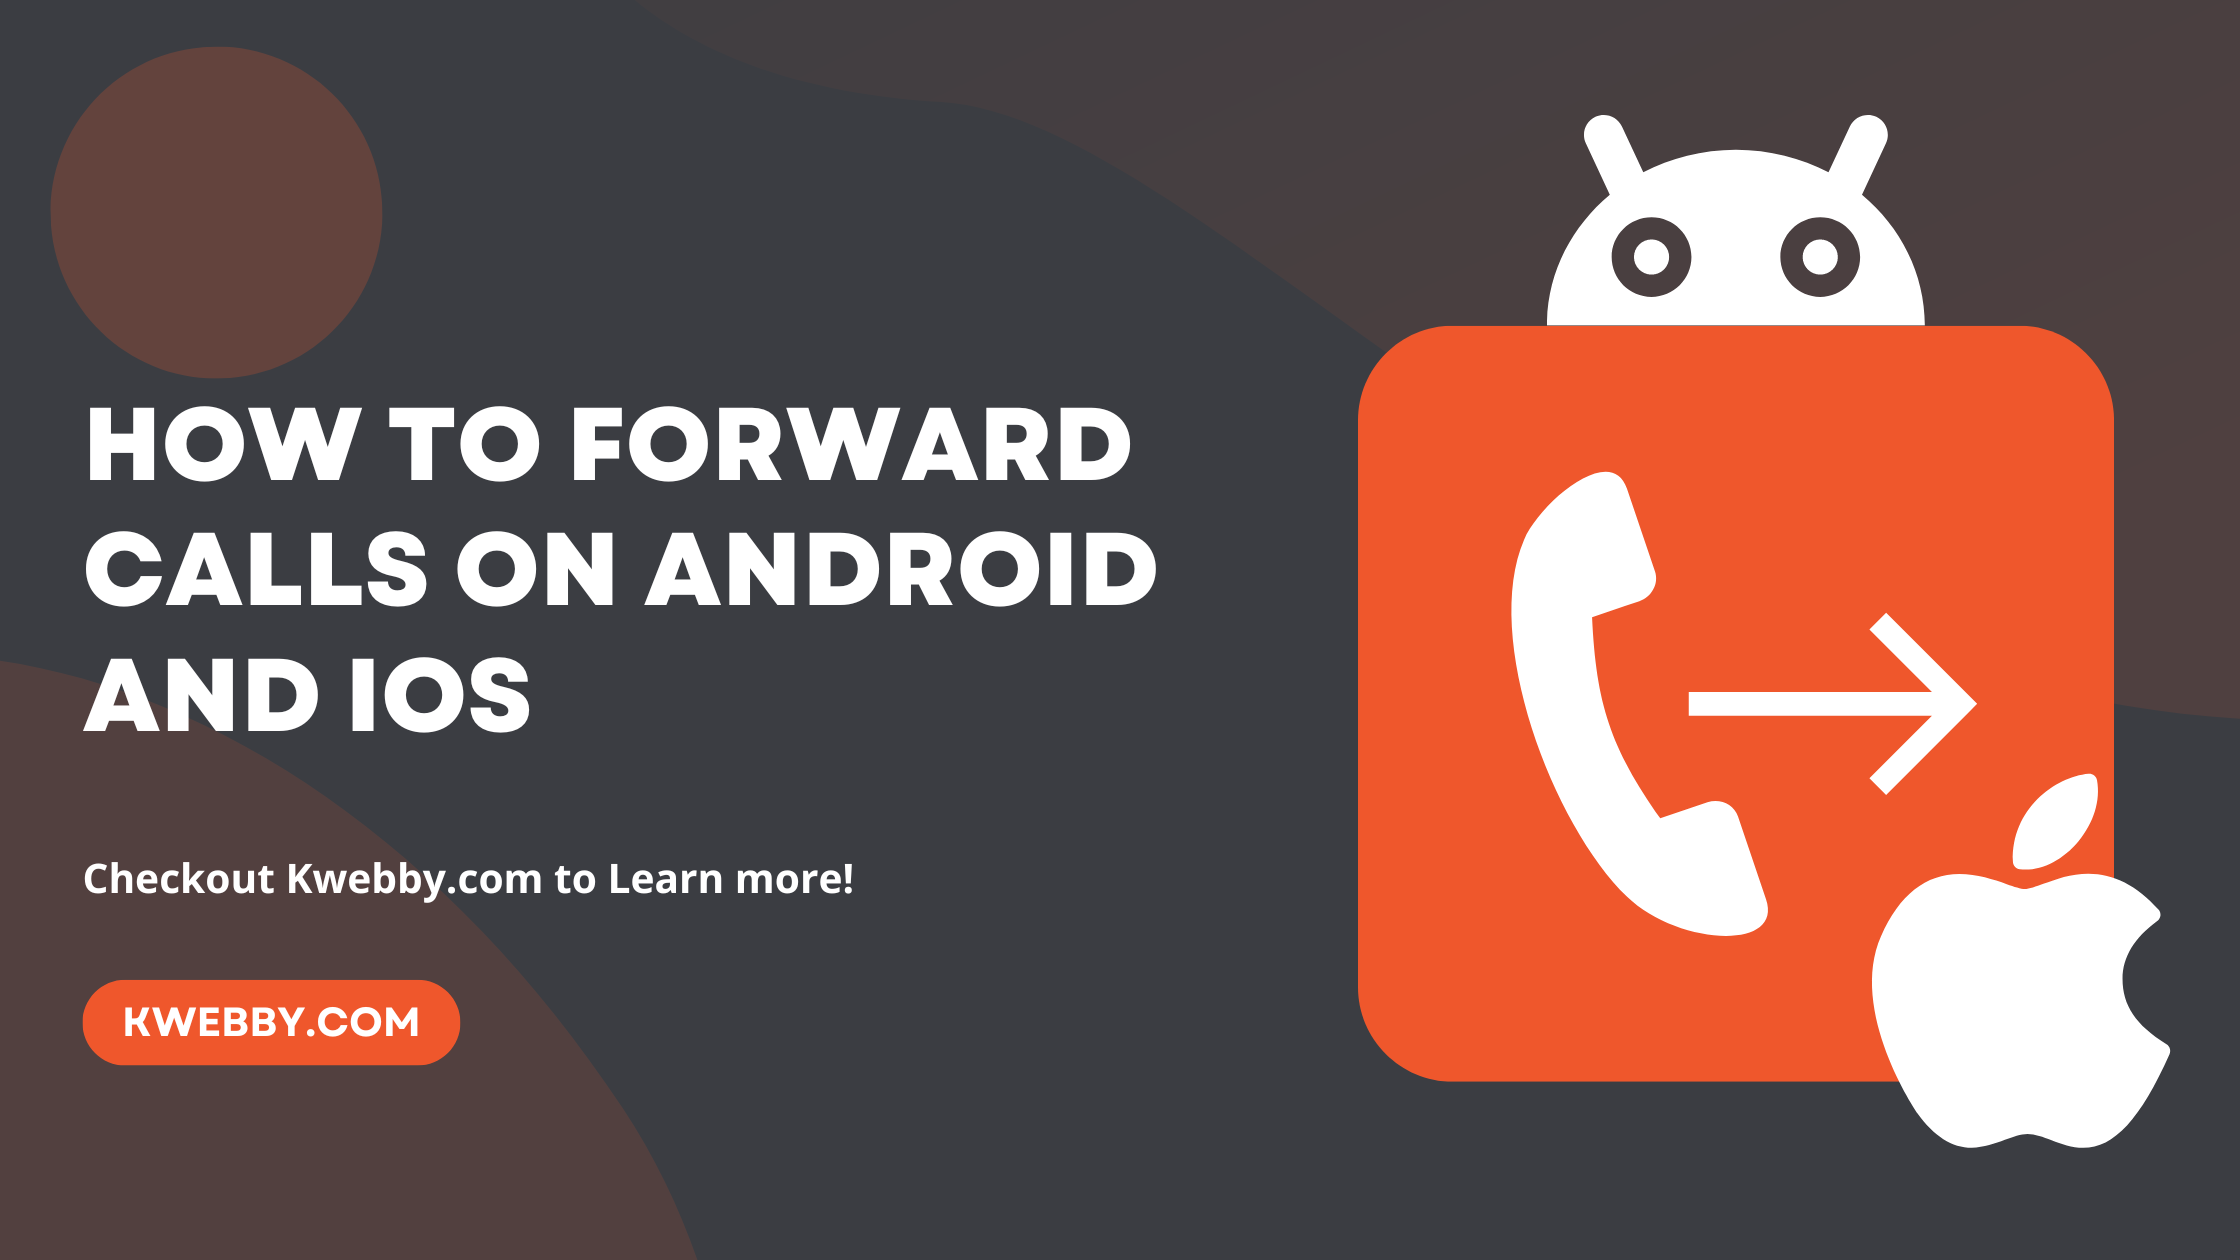 How to Forward Calls on Android and iOS